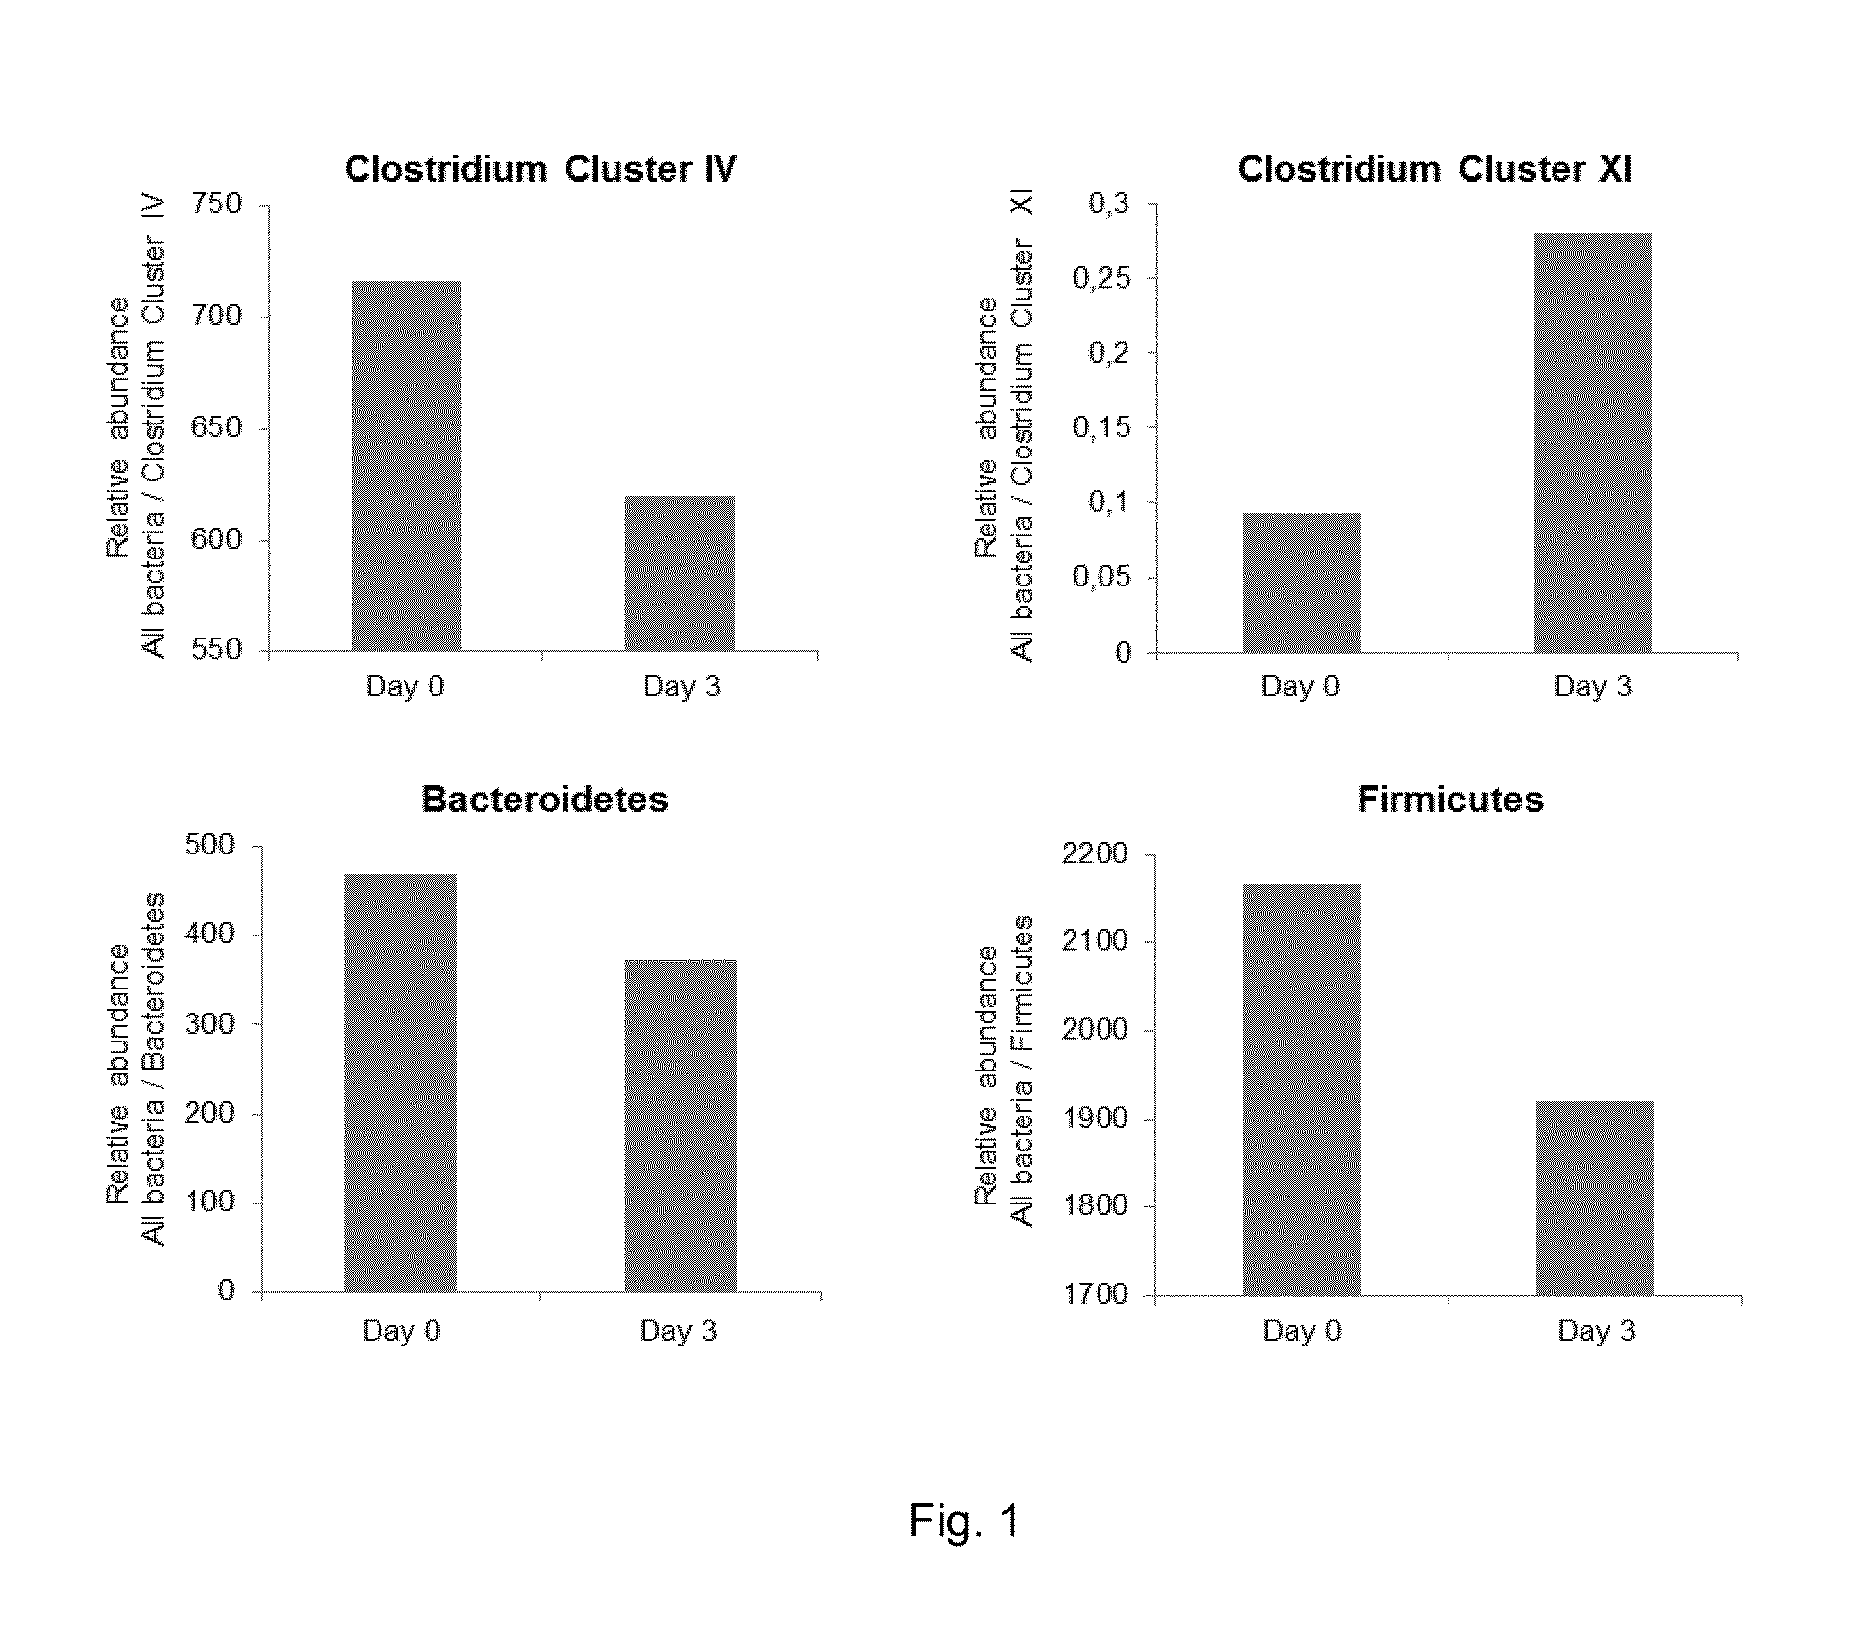 Pharmaceutical composition containing nicotinic acid and/or nicotinamide for benefically influencing blood lipid levels by modifying the intestinal microbiota